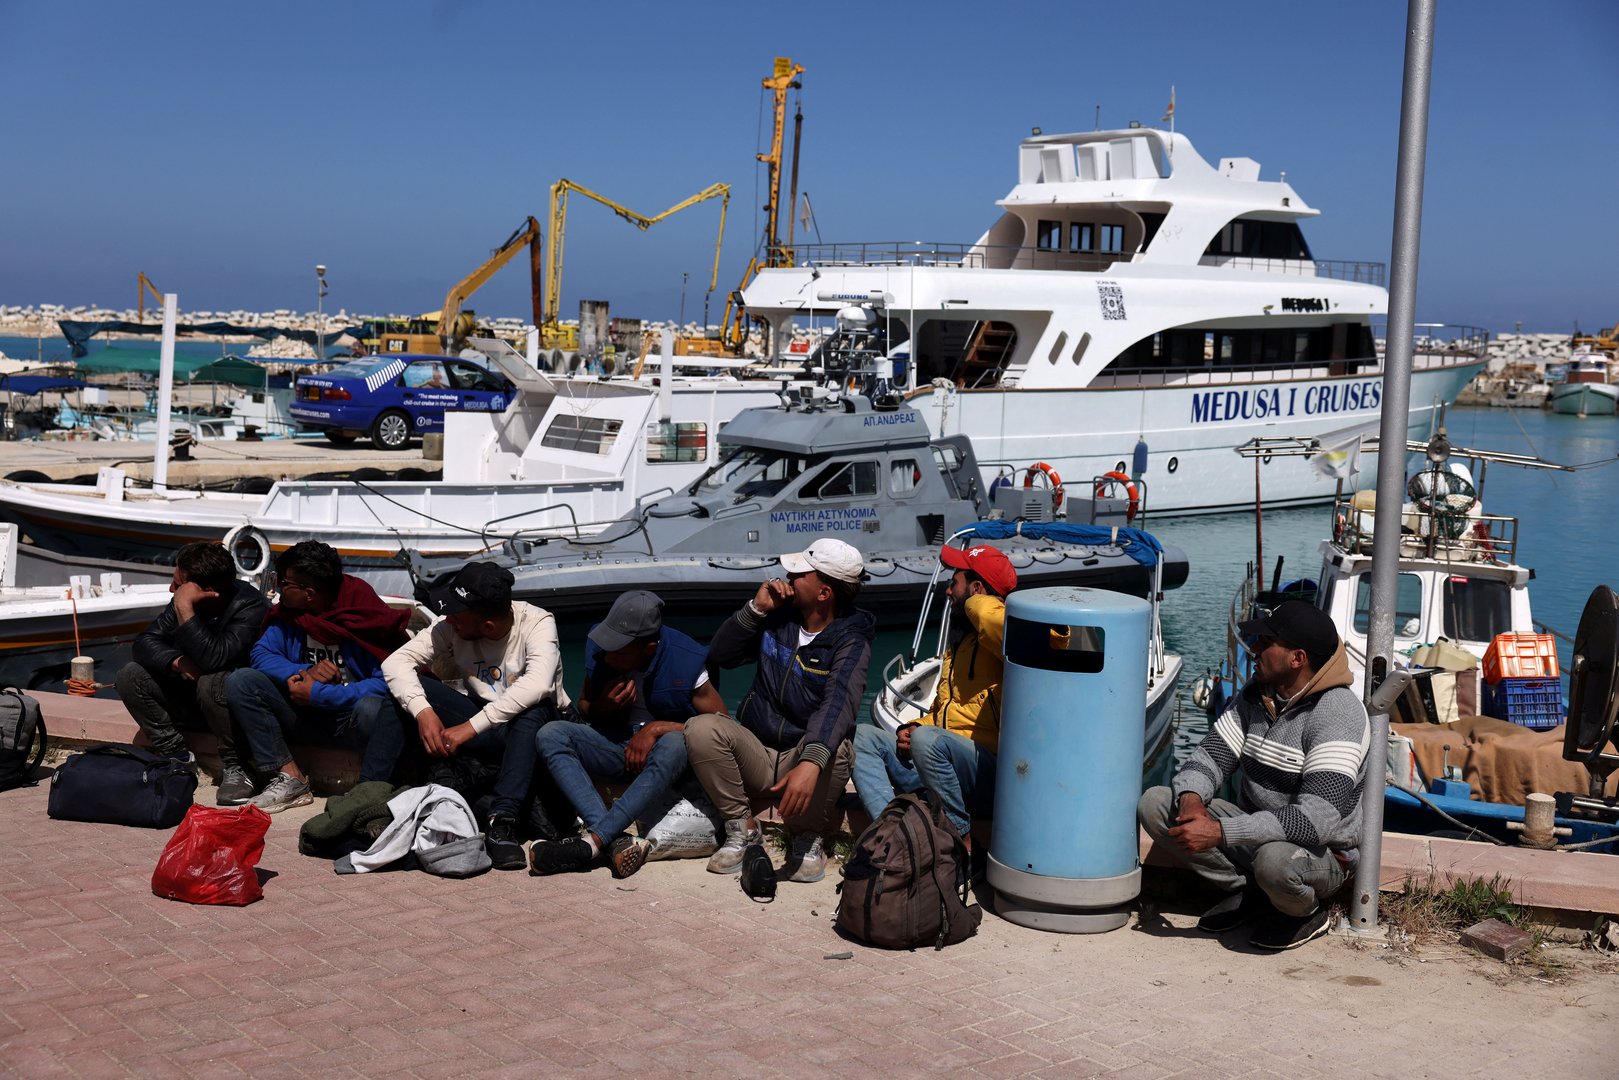 image Syrian migrant removals to focus on criminal elements